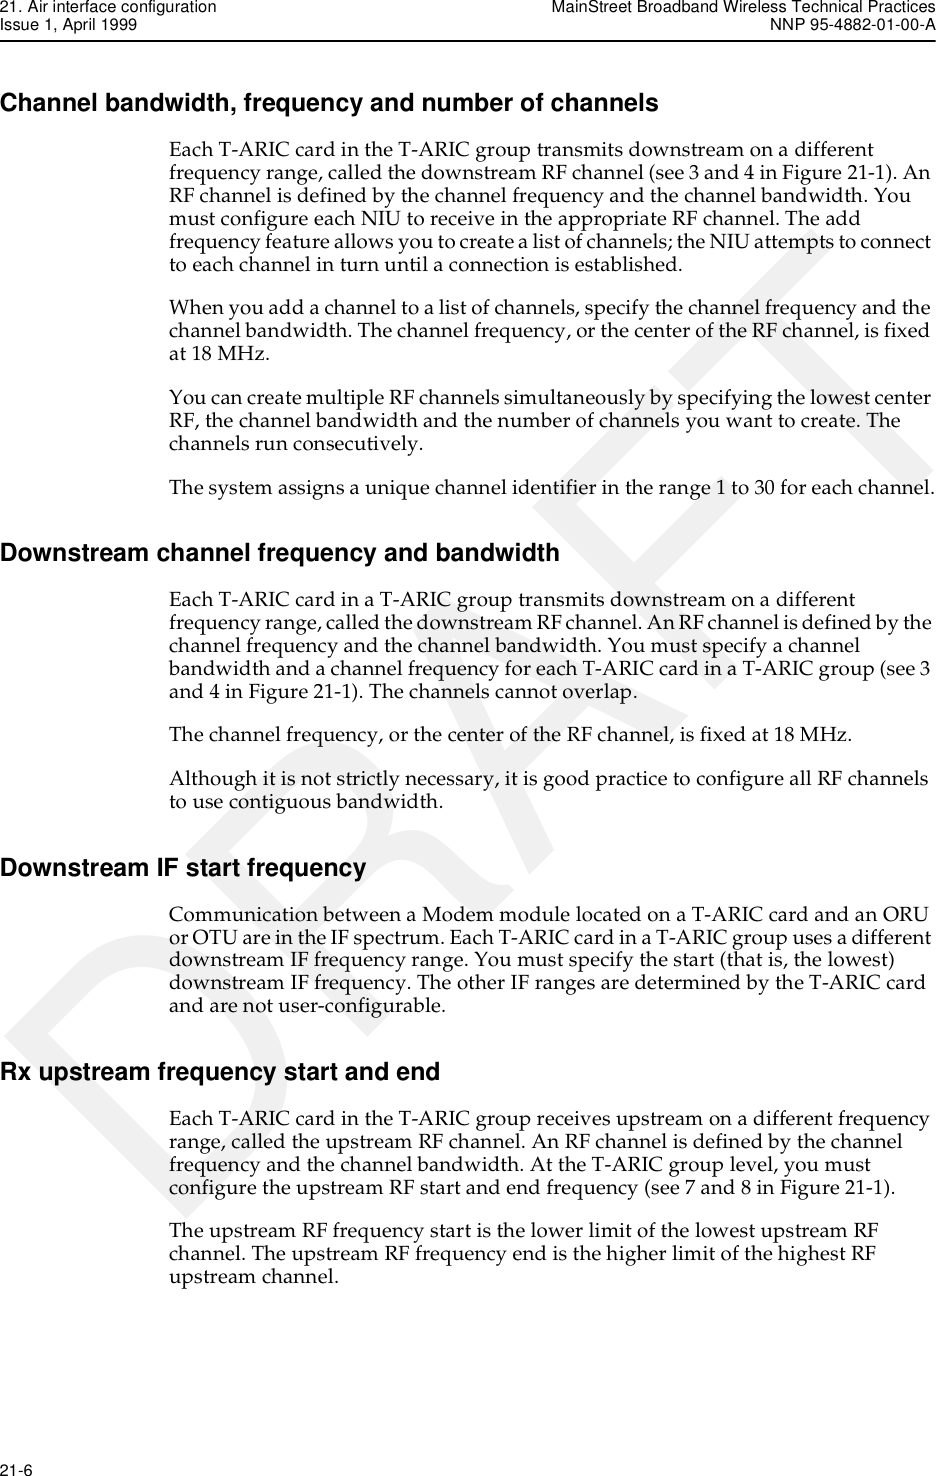 21. Air interface configuration MainStreet Broadband Wireless Technical PracticesIssue 1, April 1999 NNP 95-4882-01-00-A21-6   DRAFTChannel bandwidth, frequency and number of channelsEach T-ARIC card in the T-ARIC group transmits downstream on a different frequency range, called the downstream RF channel (see 3 and 4 in Figure 21-1). An RF channel is defined by the channel frequency and the channel bandwidth. You must configure each NIU to receive in the appropriate RF channel. The add frequency feature allows you to create a list of channels; the NIU attempts to connect to each channel in turn until a connection is established.When you add a channel to a list of channels, specify the channel frequency and the channel bandwidth. The channel frequency, or the center of the RF channel, is fixed at 18 MHz.You can create multiple RF channels simultaneously by specifying the lowest center RF, the channel bandwidth and the number of channels you want to create. The channels run consecutively.The system assigns a unique channel identifier in the range 1 to 30 for each channel.Downstream channel frequency and bandwidthEach T-ARIC card in a T-ARIC group transmits downstream on a different frequency range, called the downstream RF channel. An RF channel is defined by the channel frequency and the channel bandwidth. You must specify a channel bandwidth and a channel frequency for each T-ARIC card in a T-ARIC group (see 3 and 4 in Figure 21-1). The channels cannot overlap.The channel frequency, or the center of the RF channel, is fixed at 18 MHz. Although it is not strictly necessary, it is good practice to configure all RF channels to use contiguous bandwidth.Downstream IF start frequencyCommunication between a Modem module located on a T-ARIC card and an ORU or OTU are in the IF spectrum. Each T-ARIC card in a T-ARIC group uses a different downstream IF frequency range. You must specify the start (that is, the lowest) downstream IF frequency. The other IF ranges are determined by the T-ARIC card and are not user-configurable.Rx upstream frequency start and endEach T-ARIC card in the T-ARIC group receives upstream on a different frequency range, called the upstream RF channel. An RF channel is defined by the channel frequency and the channel bandwidth. At the T-ARIC group level, you must configure the upstream RF start and end frequency (see 7 and 8 in Figure 21-1). The upstream RF frequency start is the lower limit of the lowest upstream RF channel. The upstream RF frequency end is the higher limit of the highest RF upstream channel.